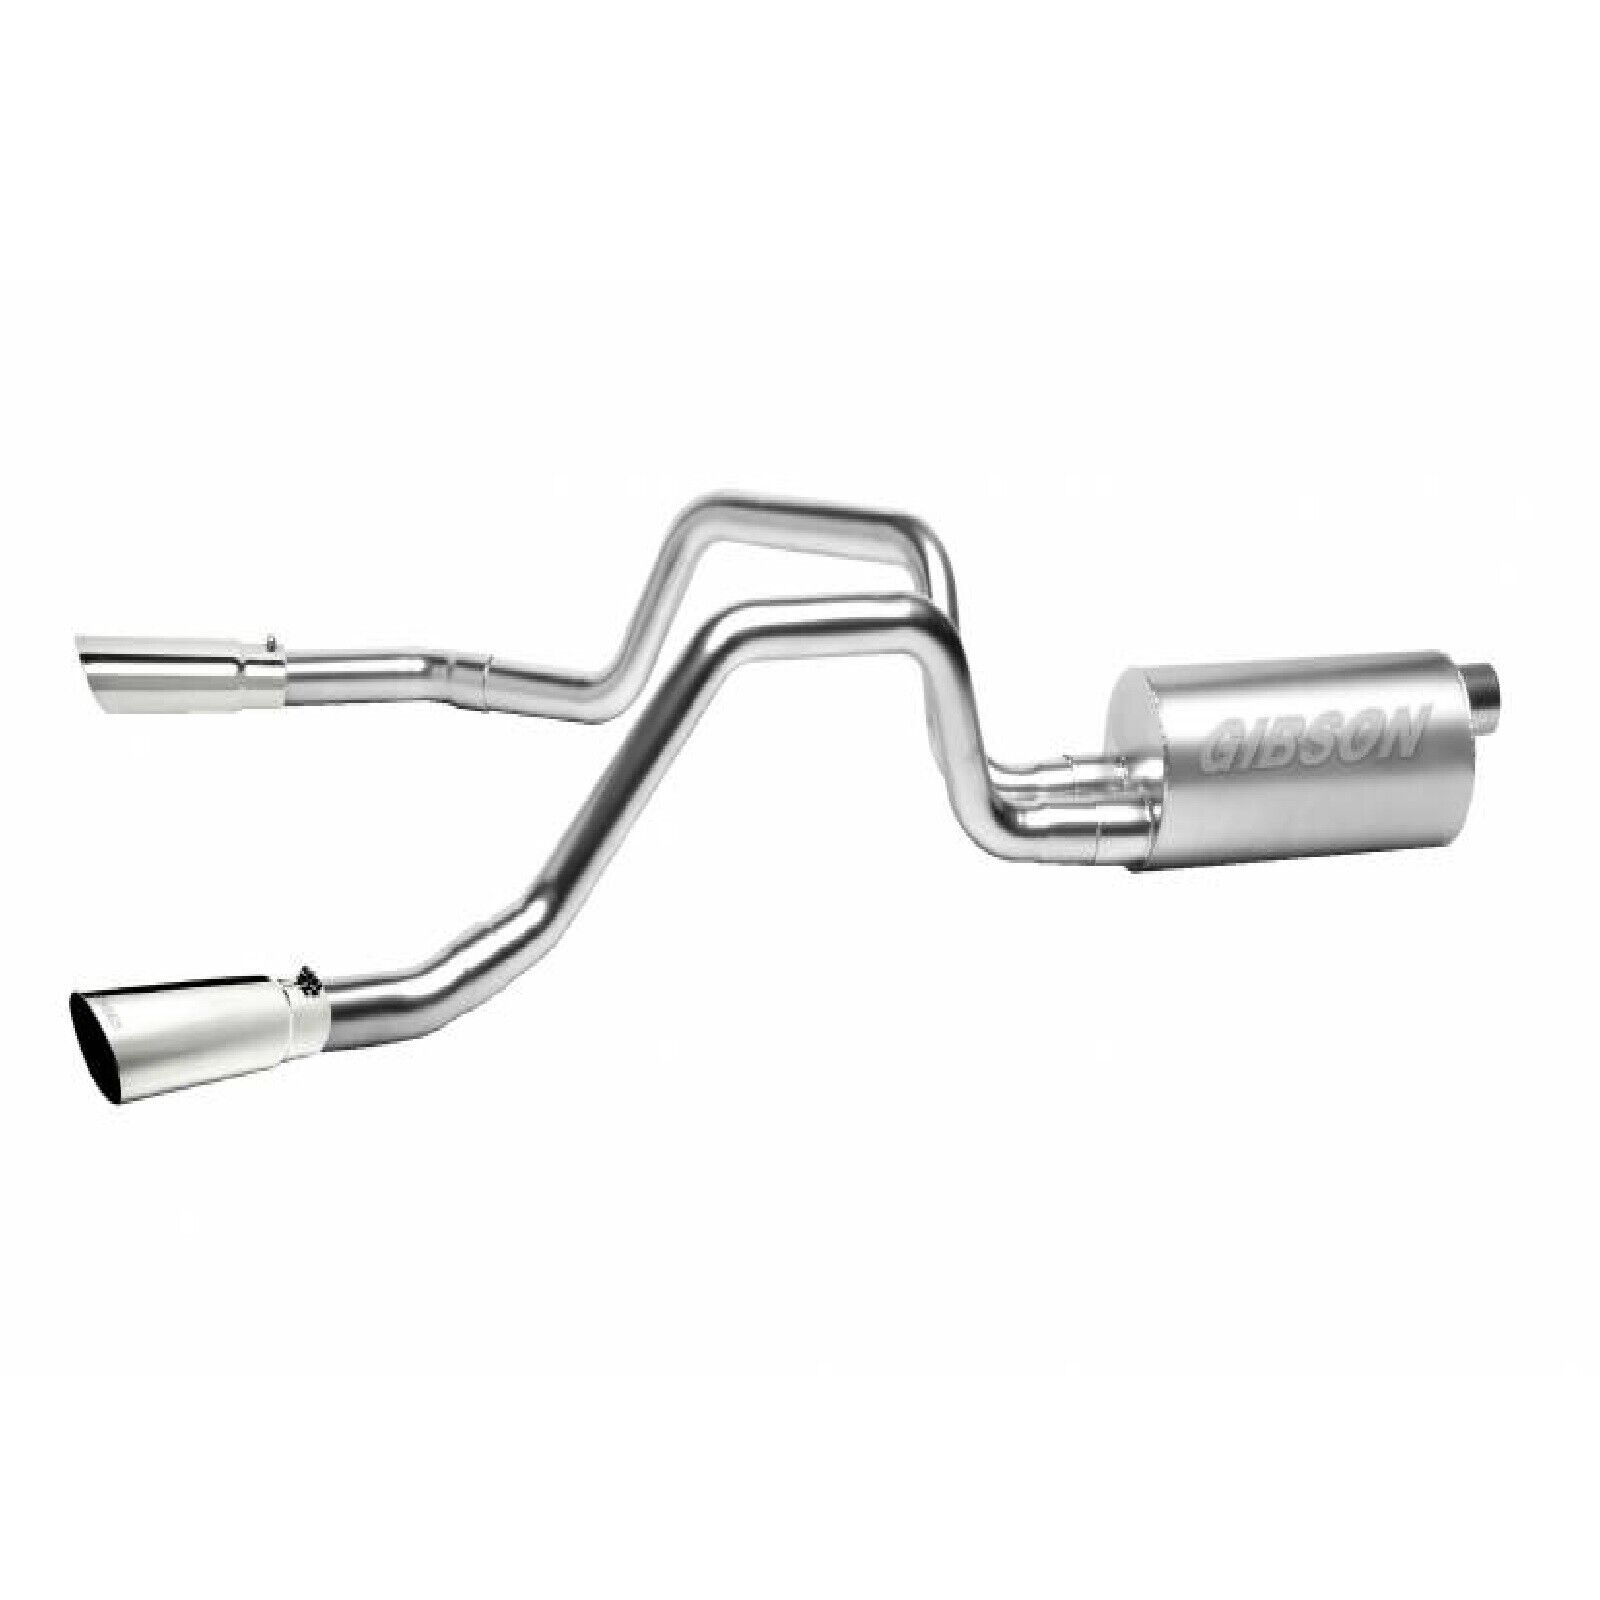 Gibson 5532 Aluminized Dual Split Exhaust System for 00-03 S10/Sonoma 4.3 Liters